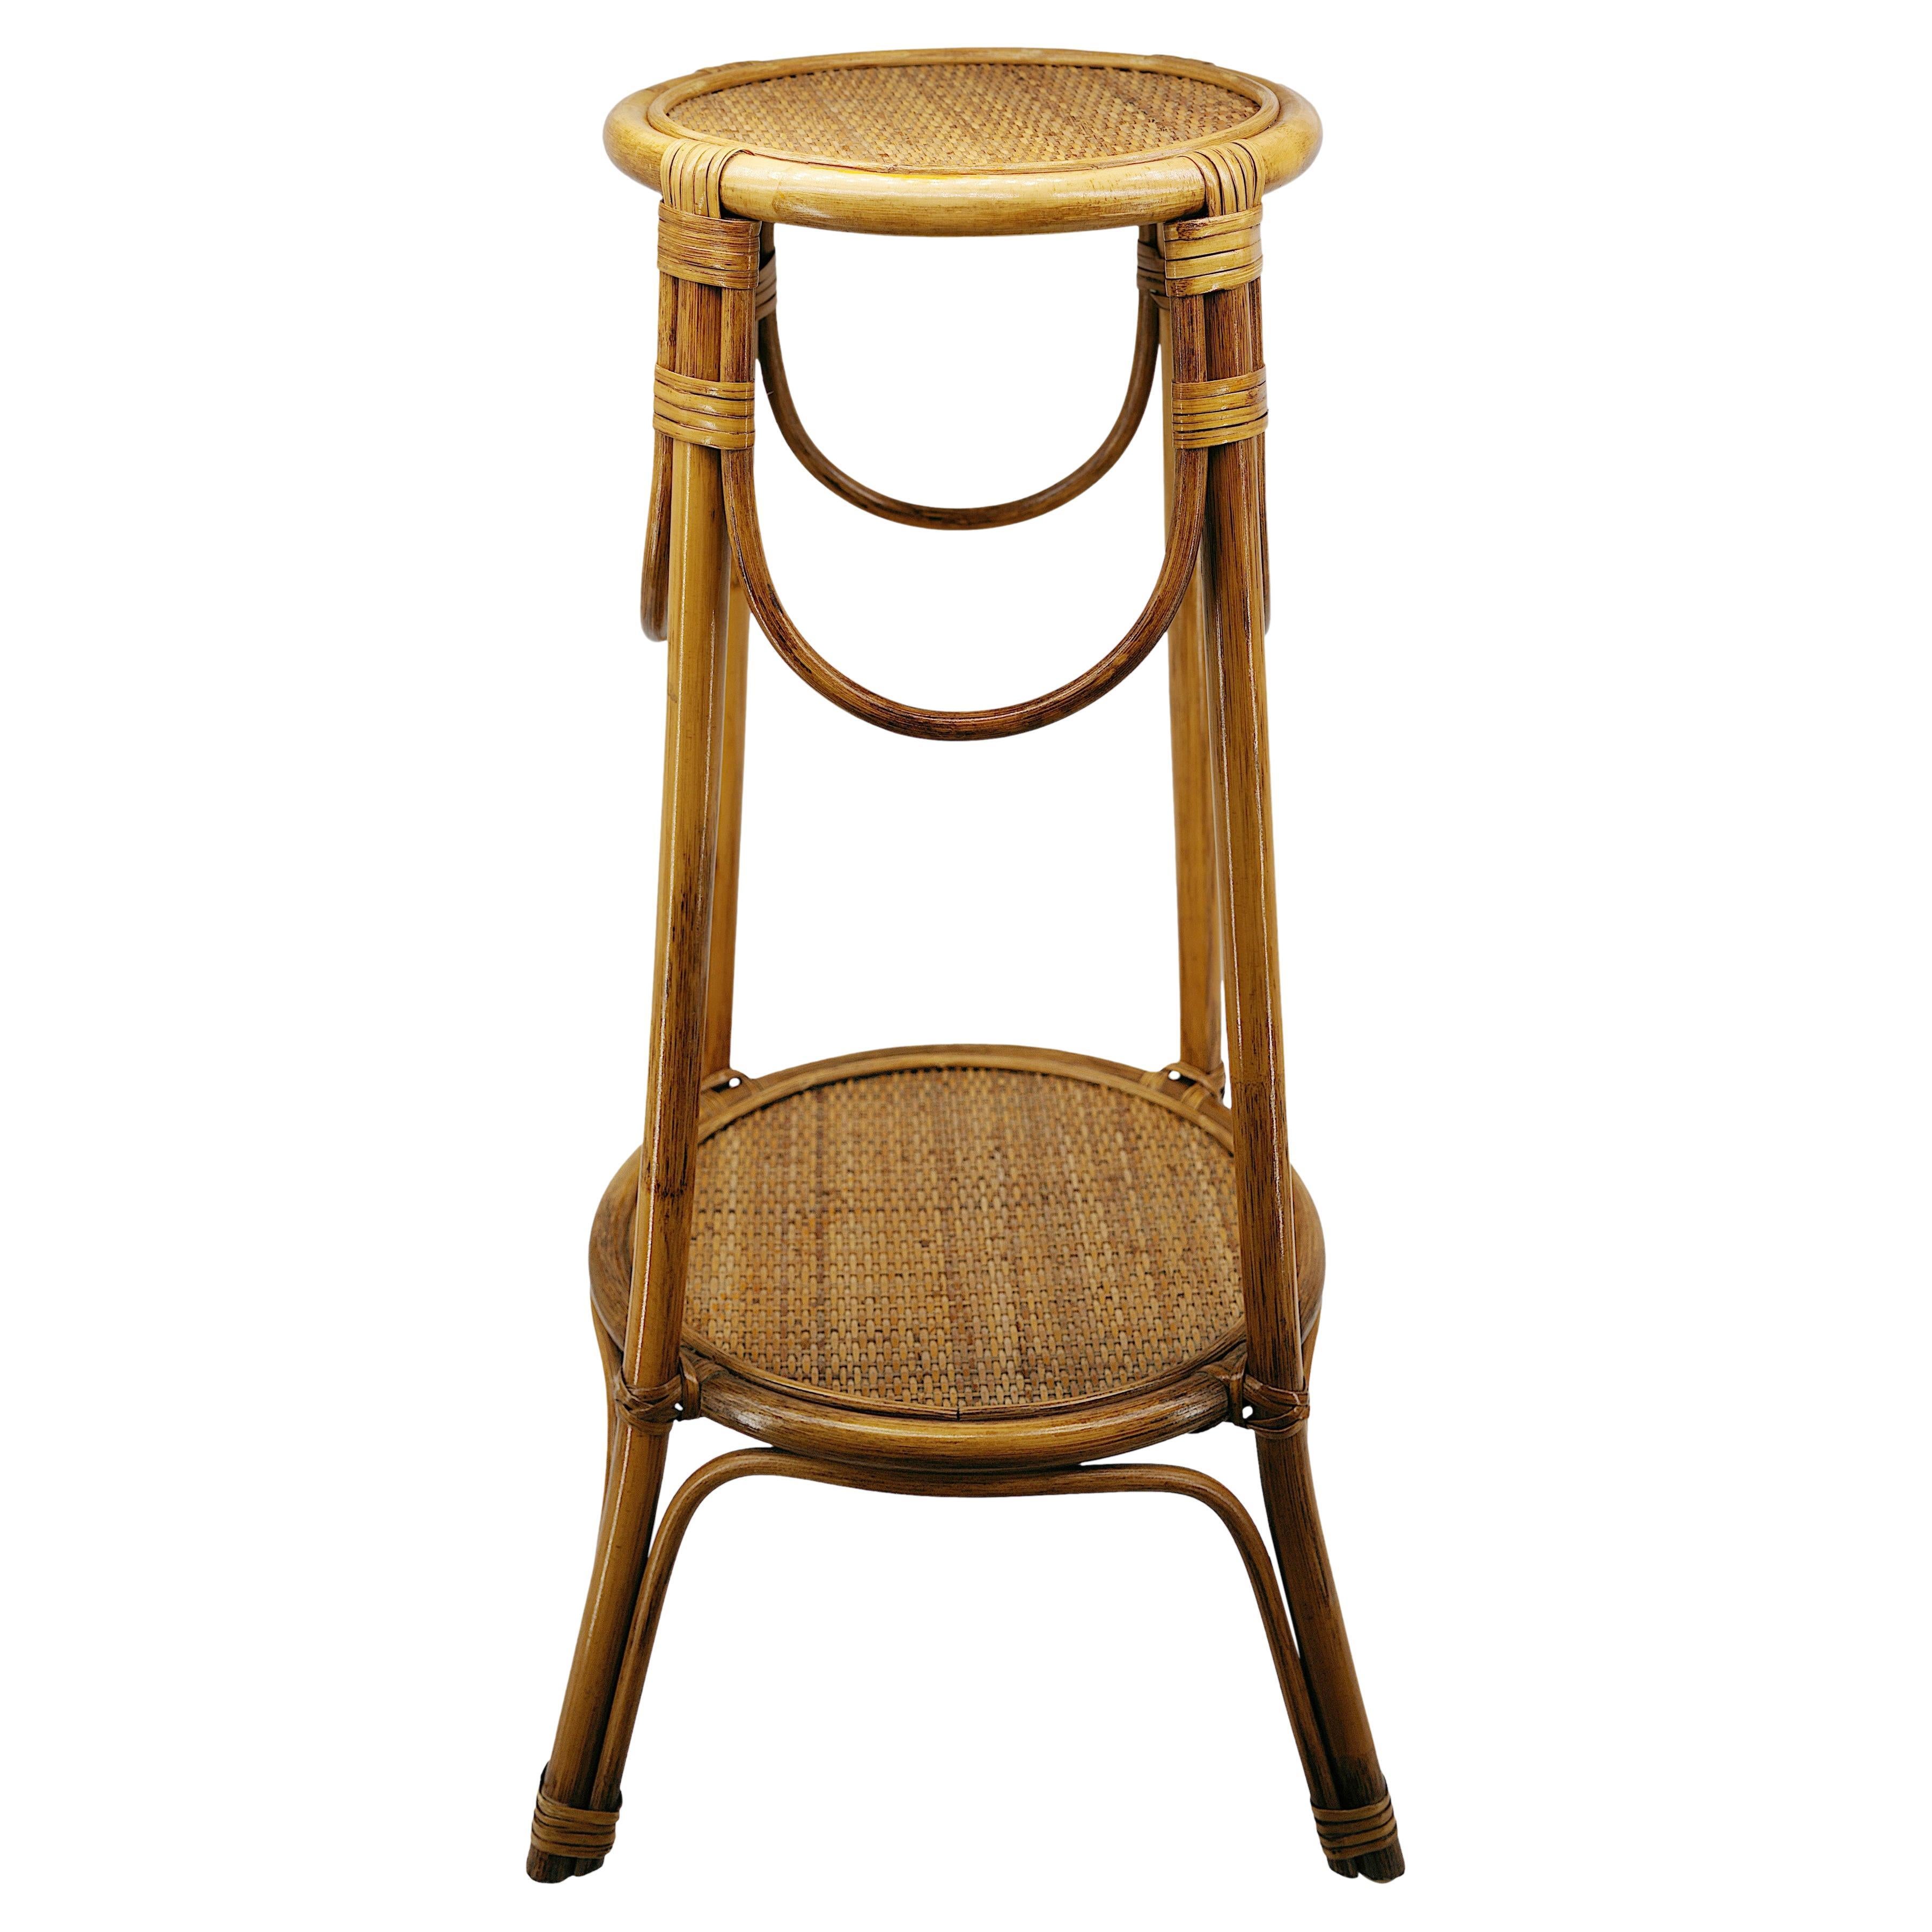 French Rattan & Bamboo Harness Table, 1950s For Sale